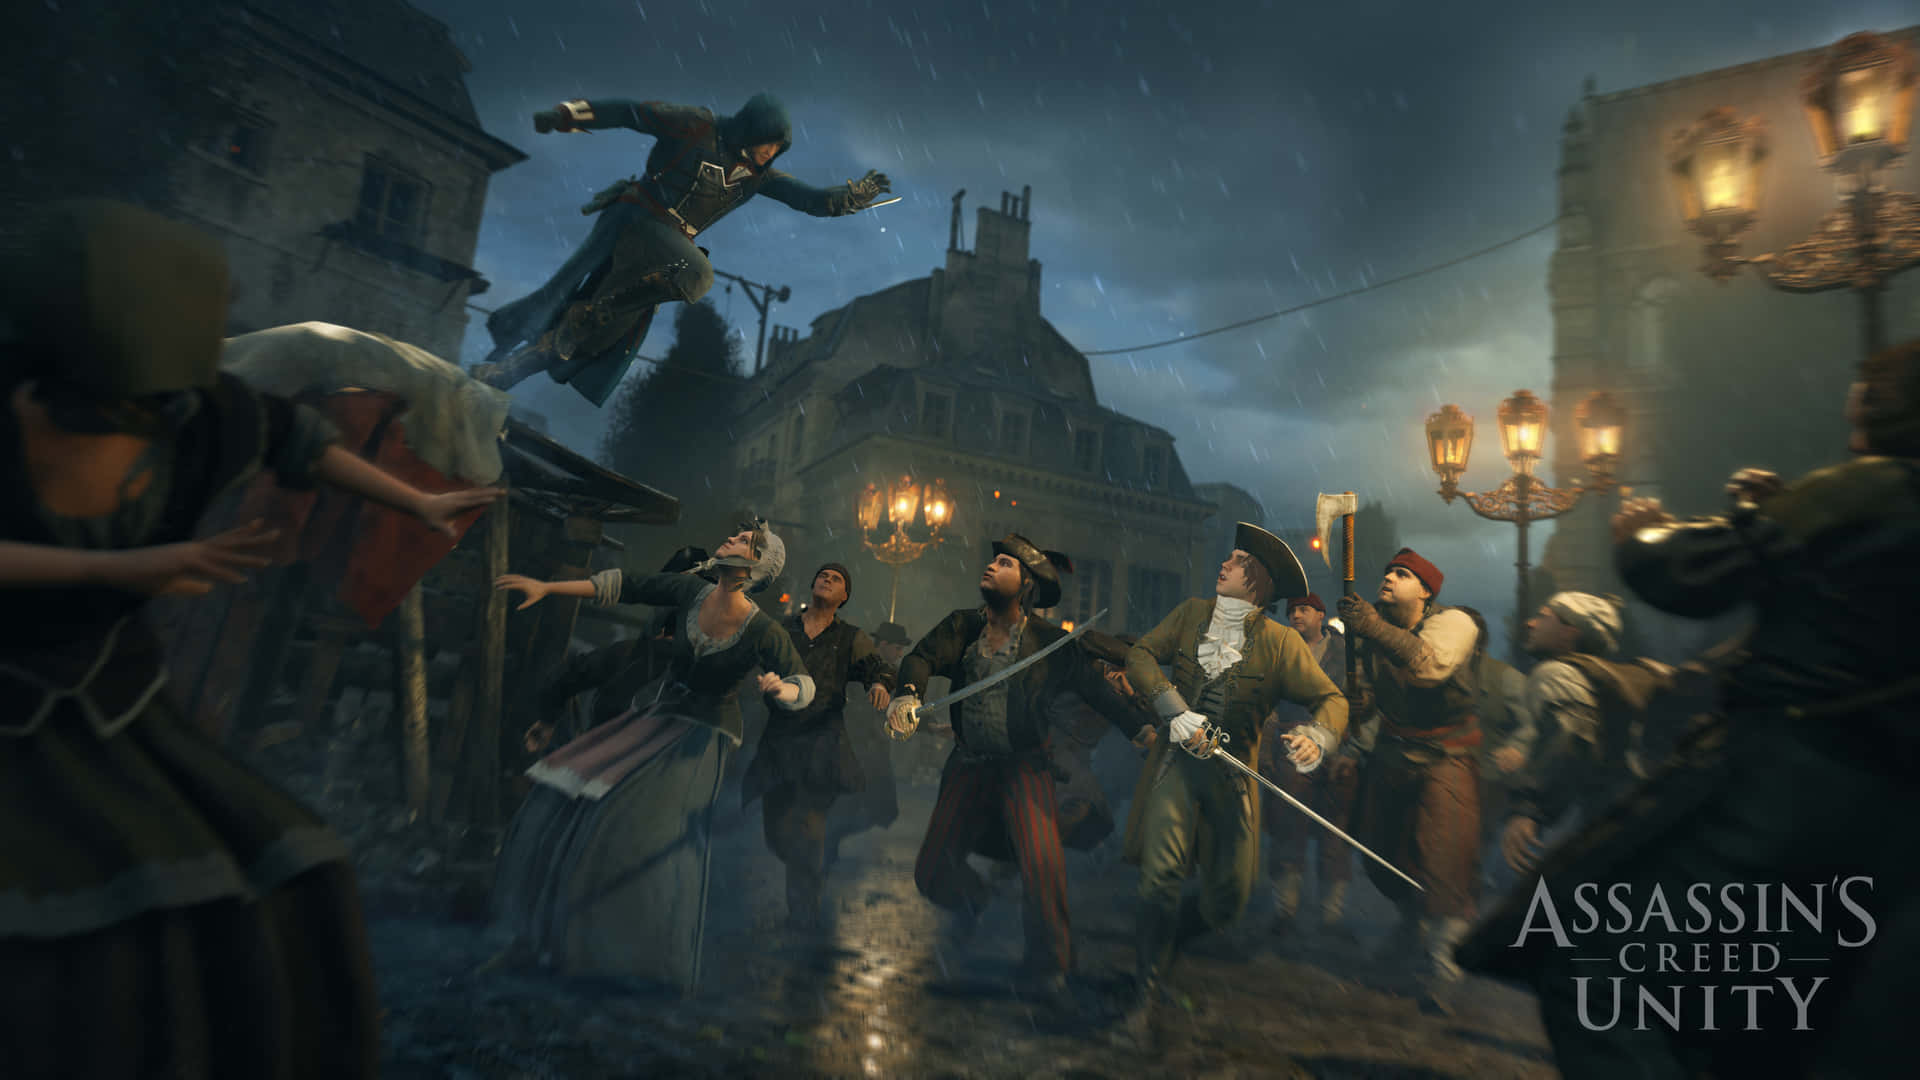 A gripping scene from Assassin's Creed Unity showcasing the protagonist in action Wallpaper